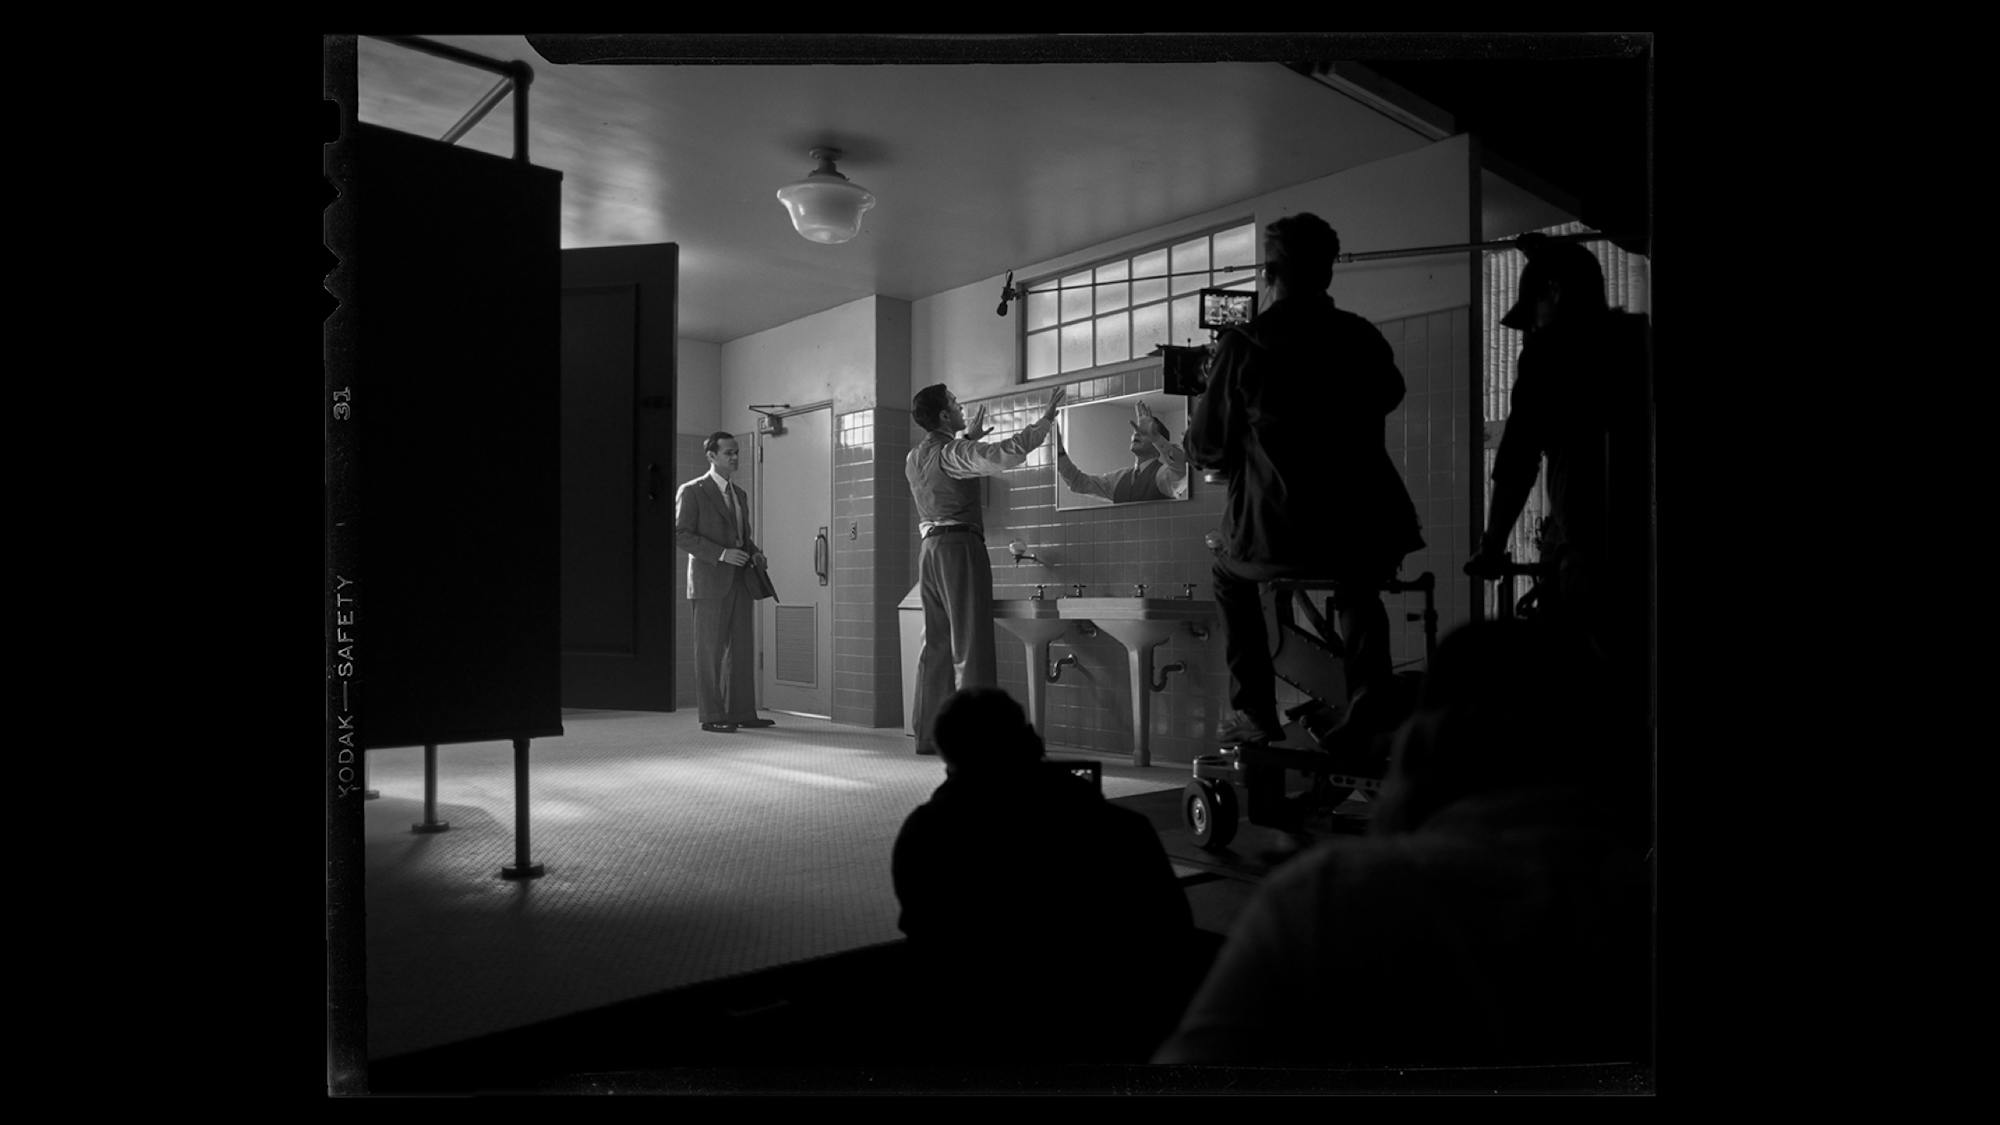 This behind-the-scenes shot shows the set of the men’s room at M-G-M. Tiles stretch up three quarters of one wall, and catch in the light. The crew is visible just off set.